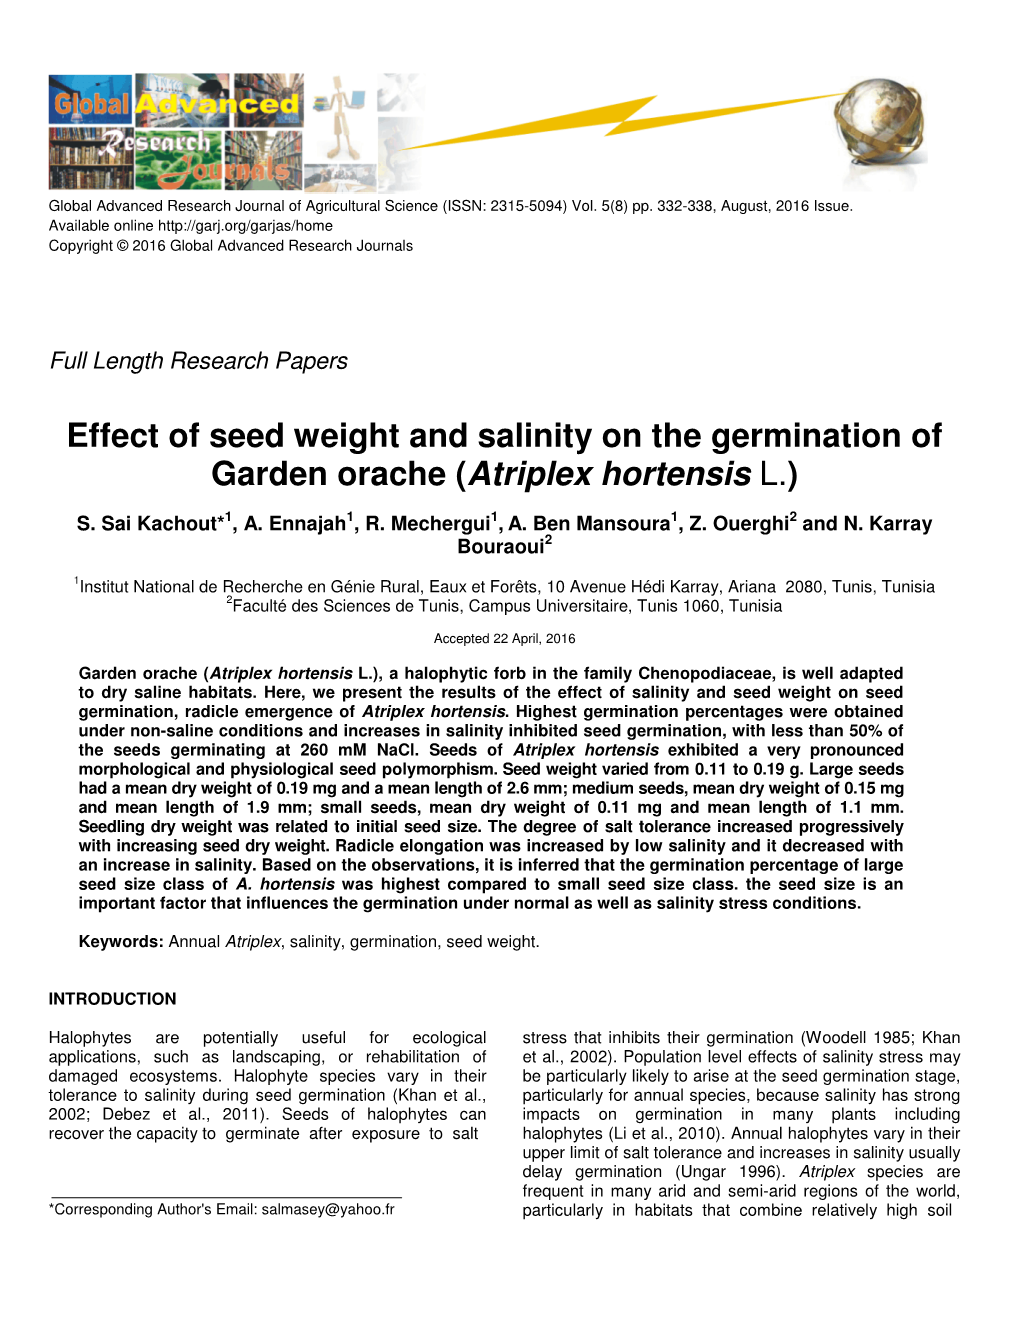 Effect of Seed Weight and Salinity on the Germination of Garden Orache (Atriplex Hortensis L